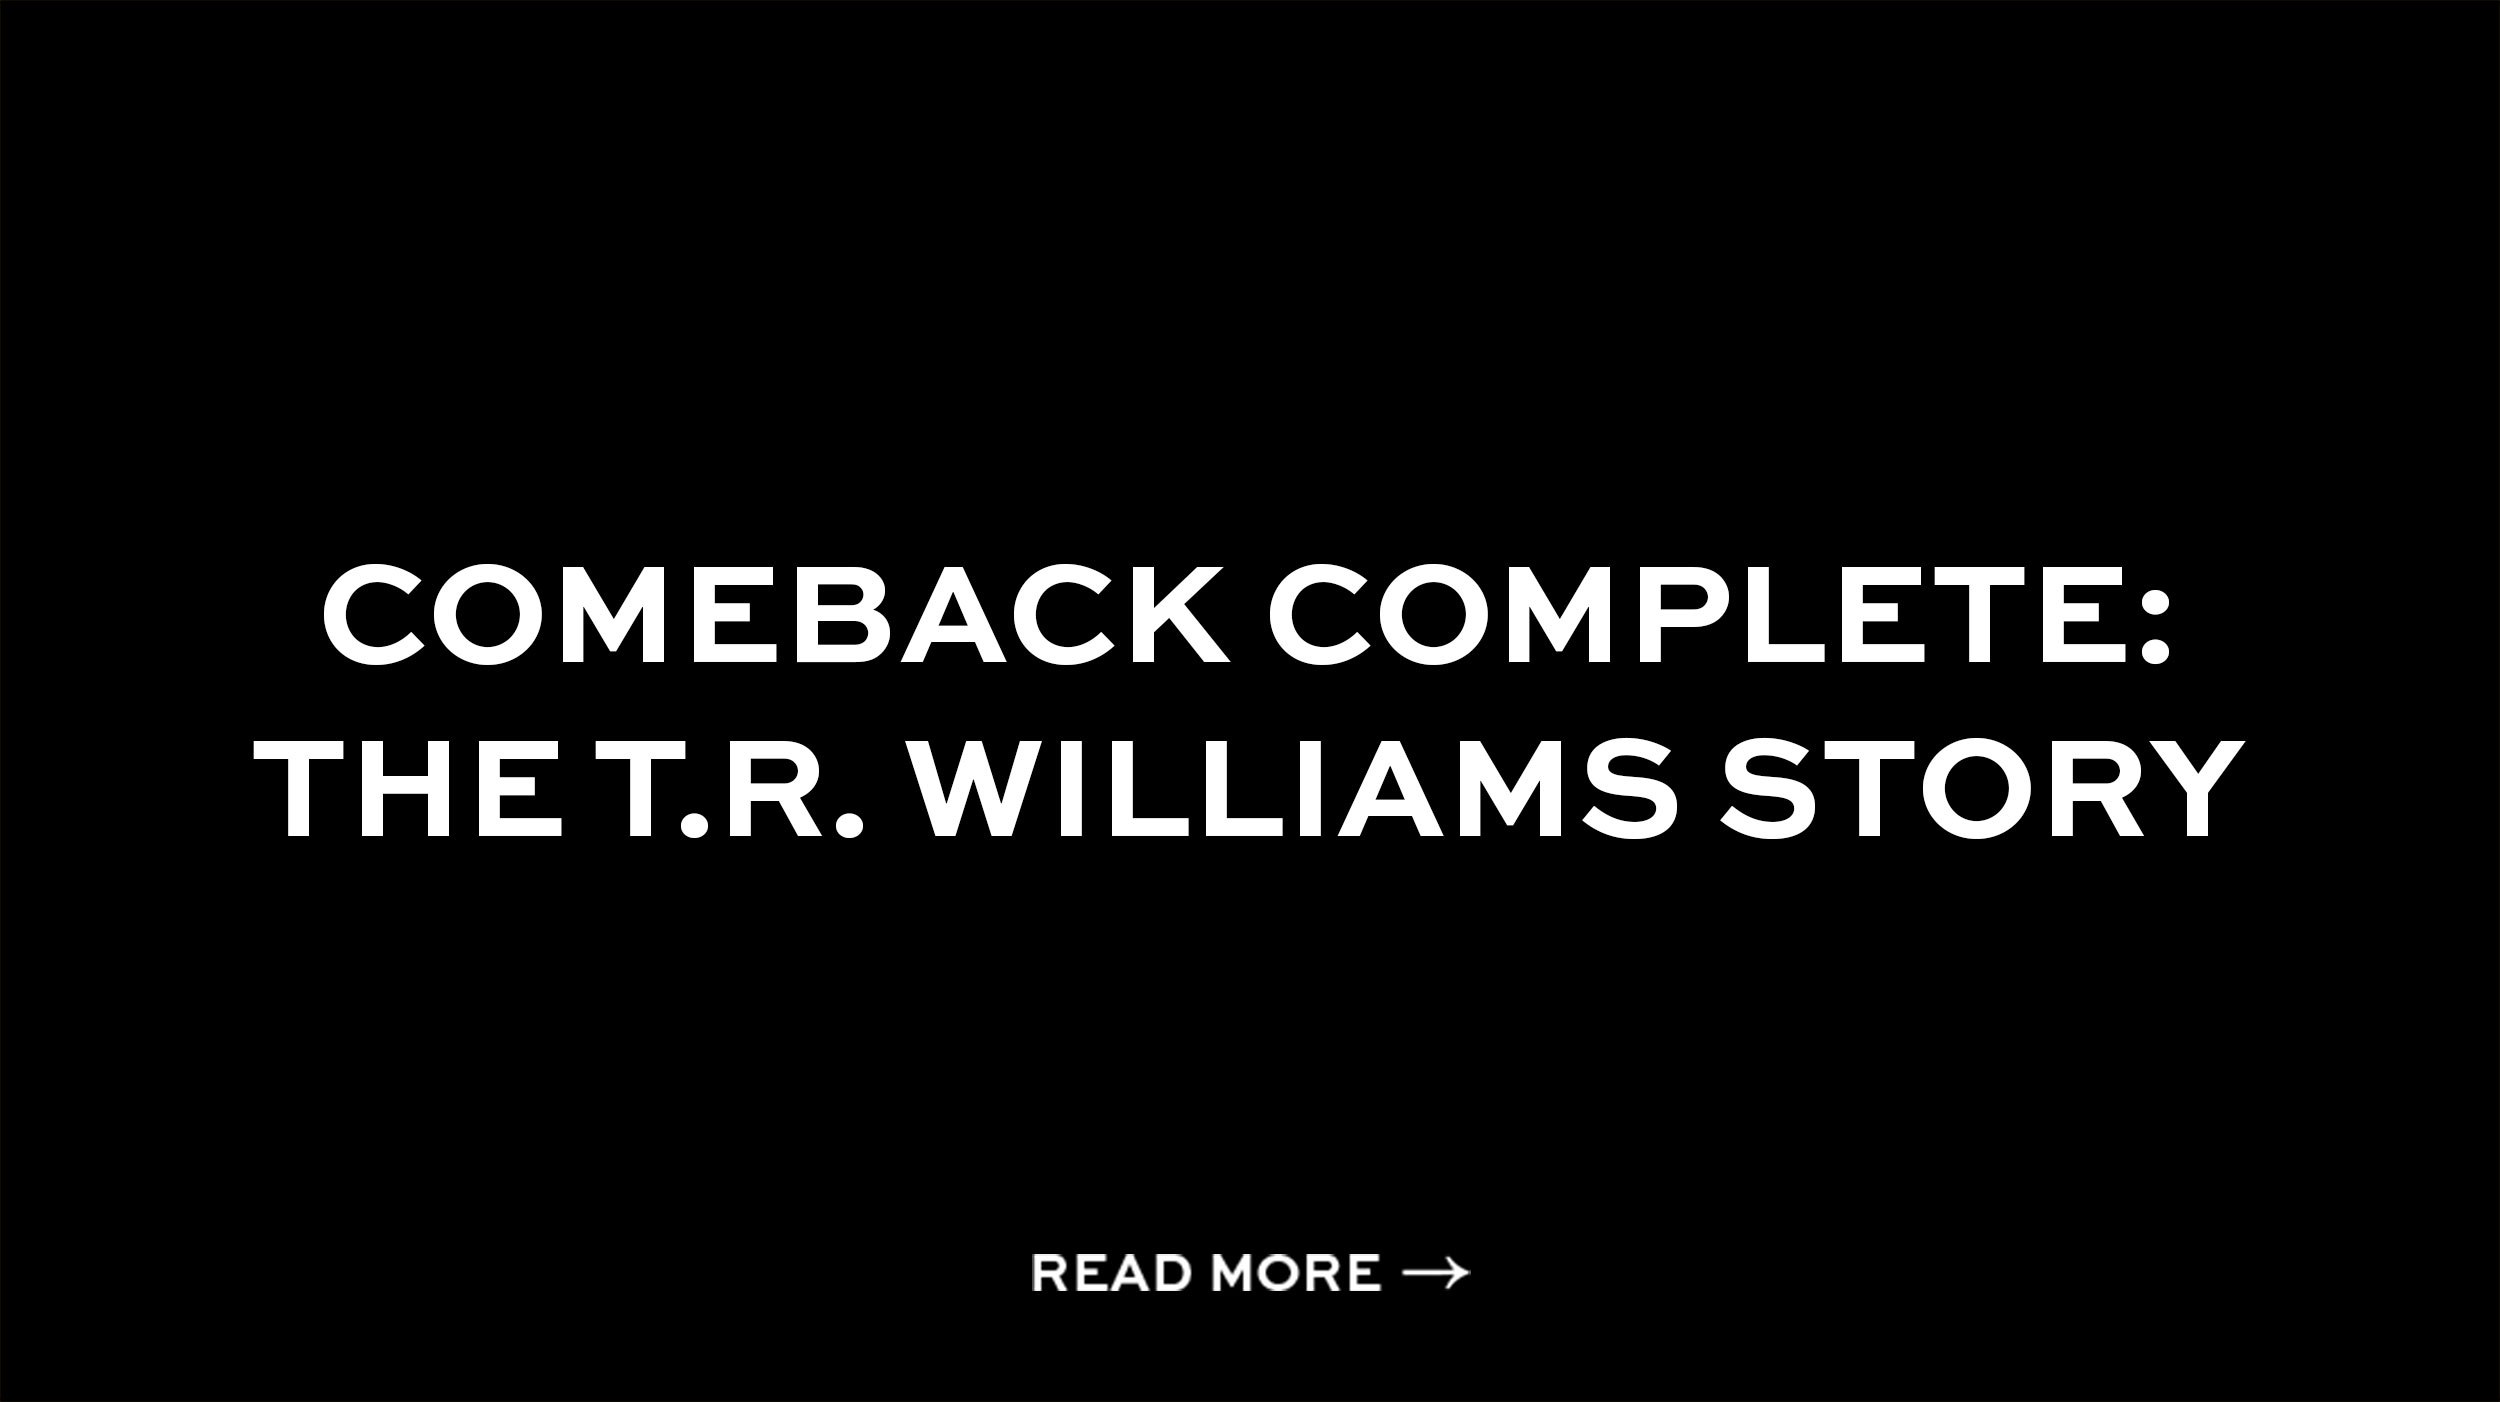 Comeback Complete: The T.R. Williams story